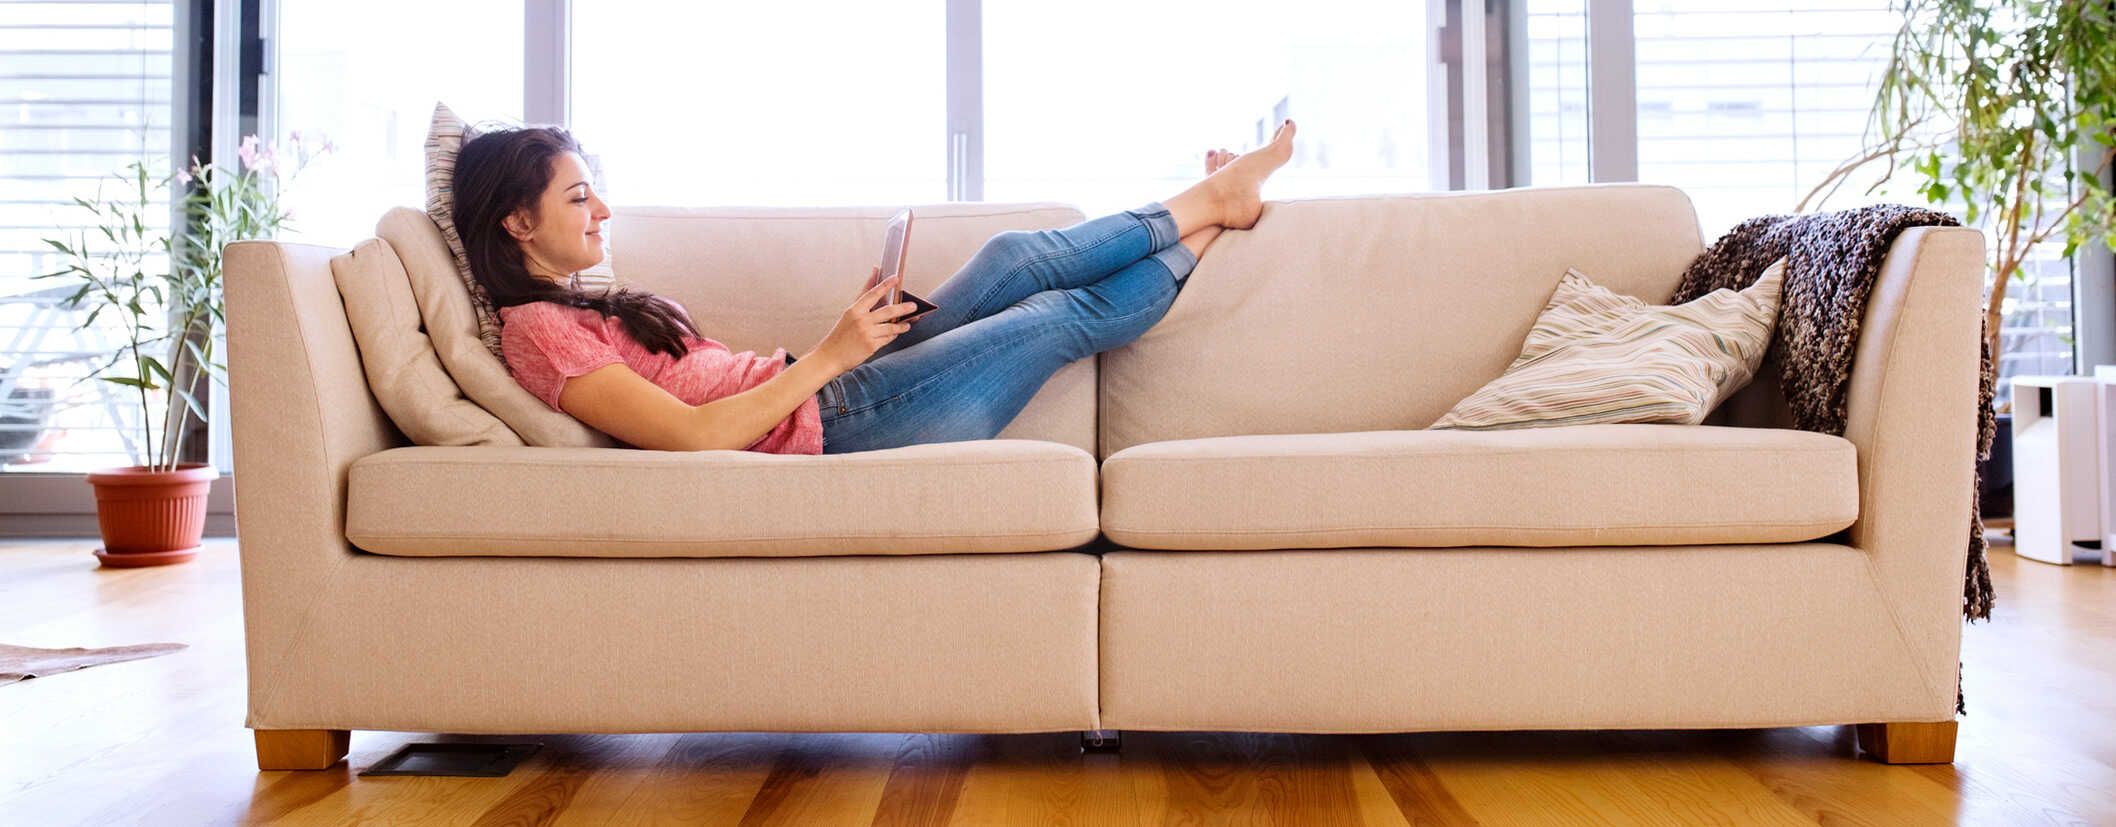 Woman on her couch reading on a digital tablet.